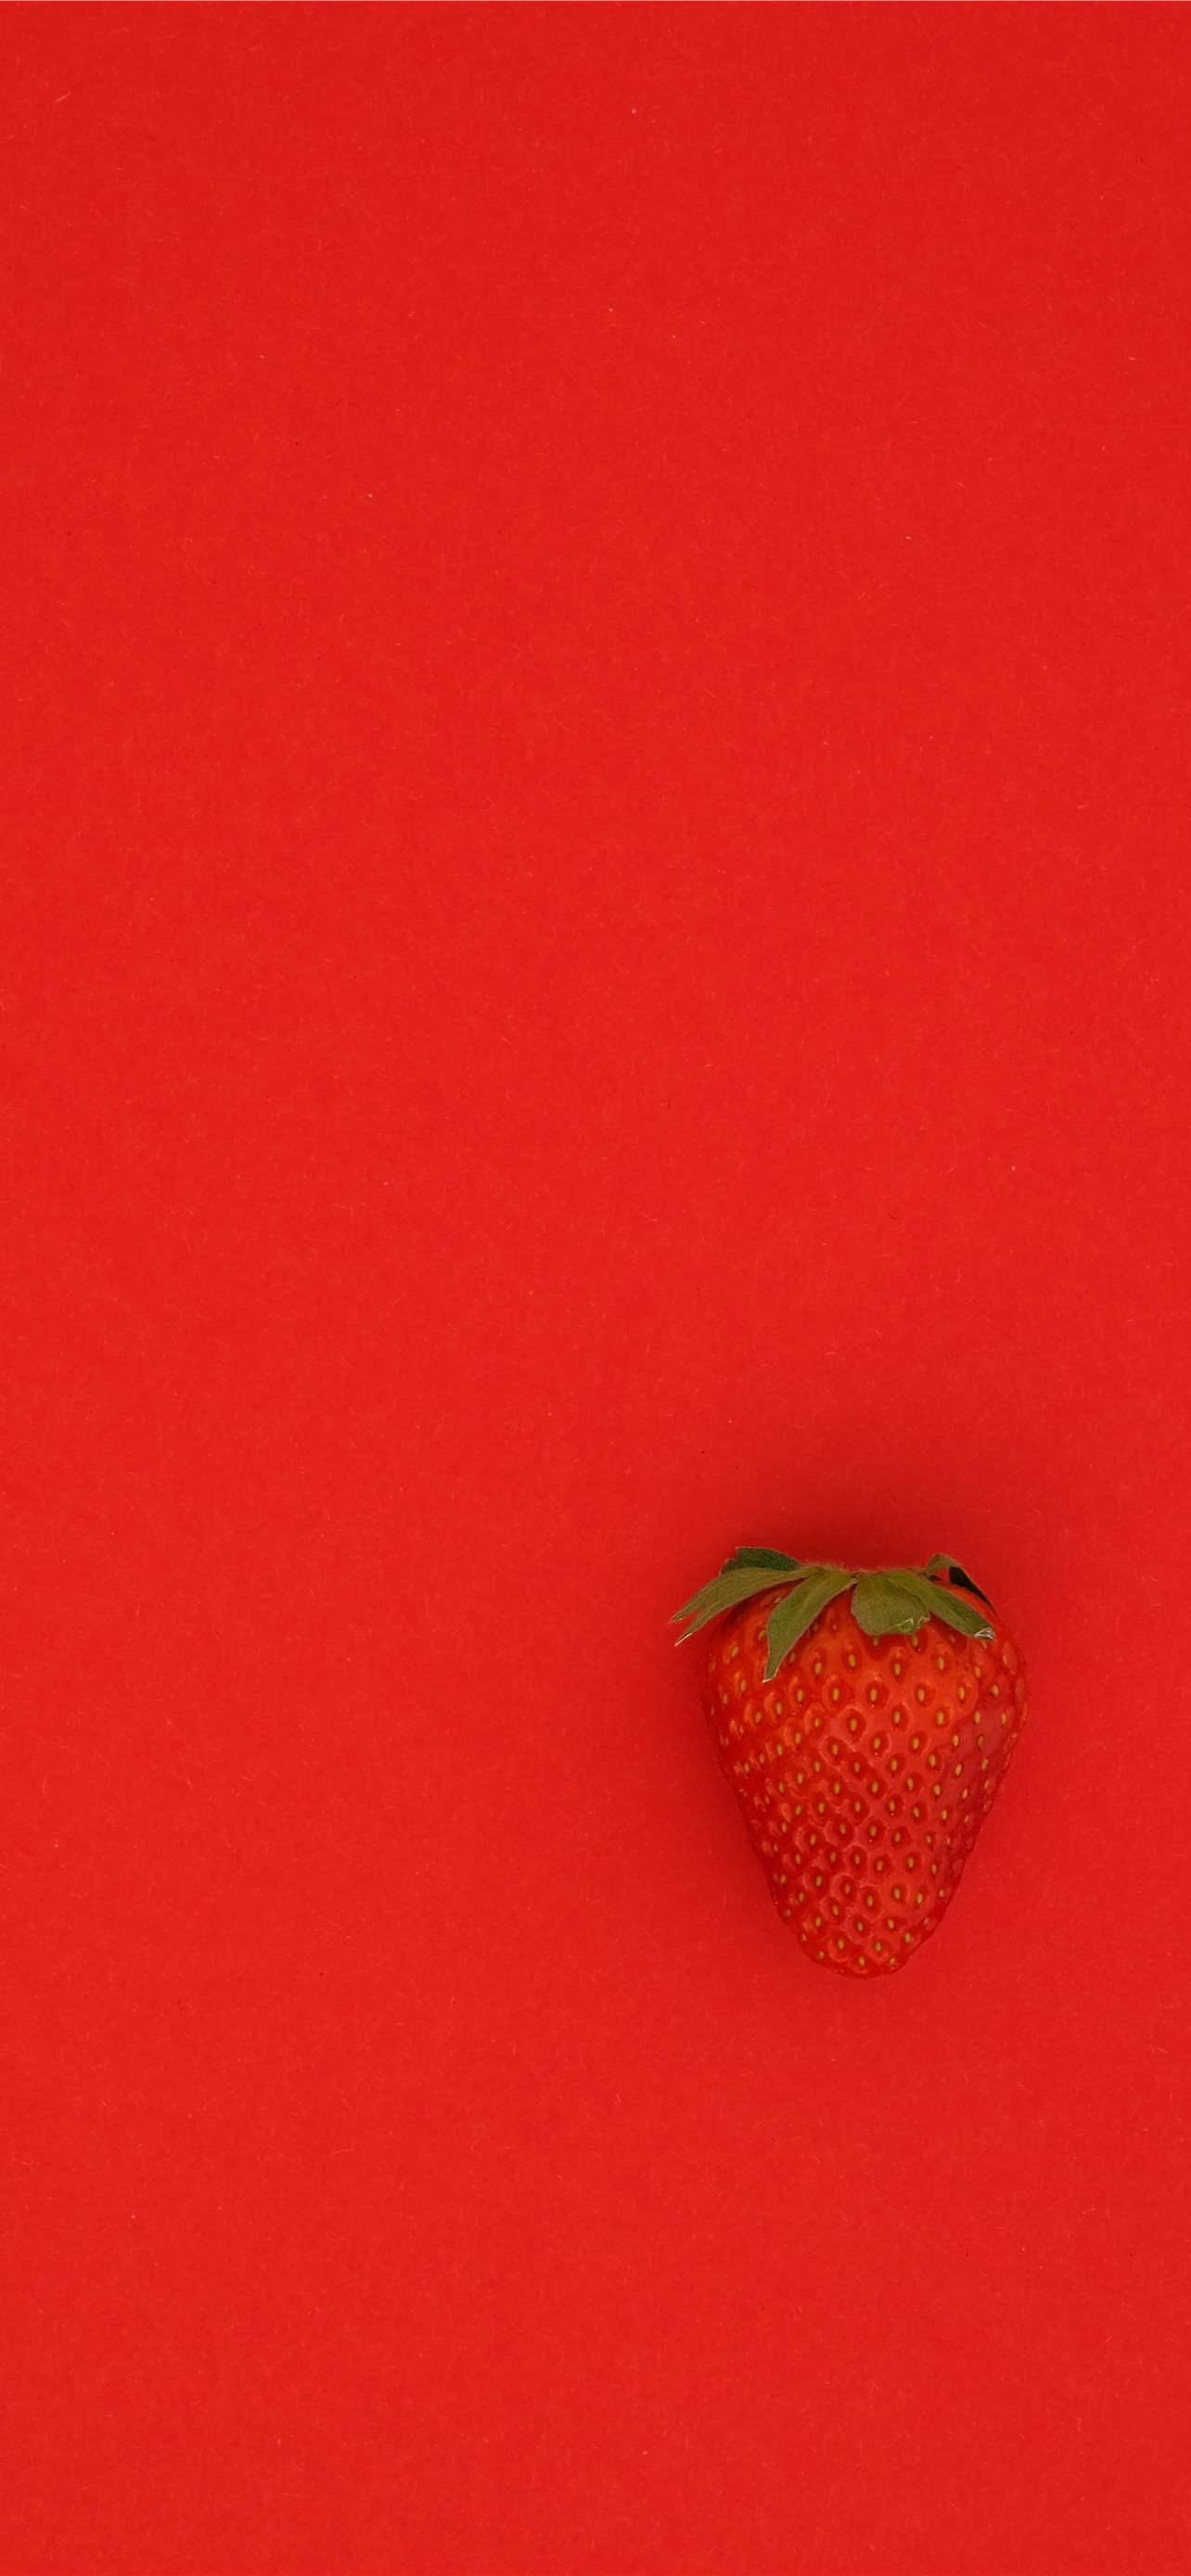 Download Strawberry backgrounds Cute kawaii wallpapers 2021 Free for  Android  Strawberry backgrounds Cute kawaii wallpapers 2021 APK Download   STEPrimocom